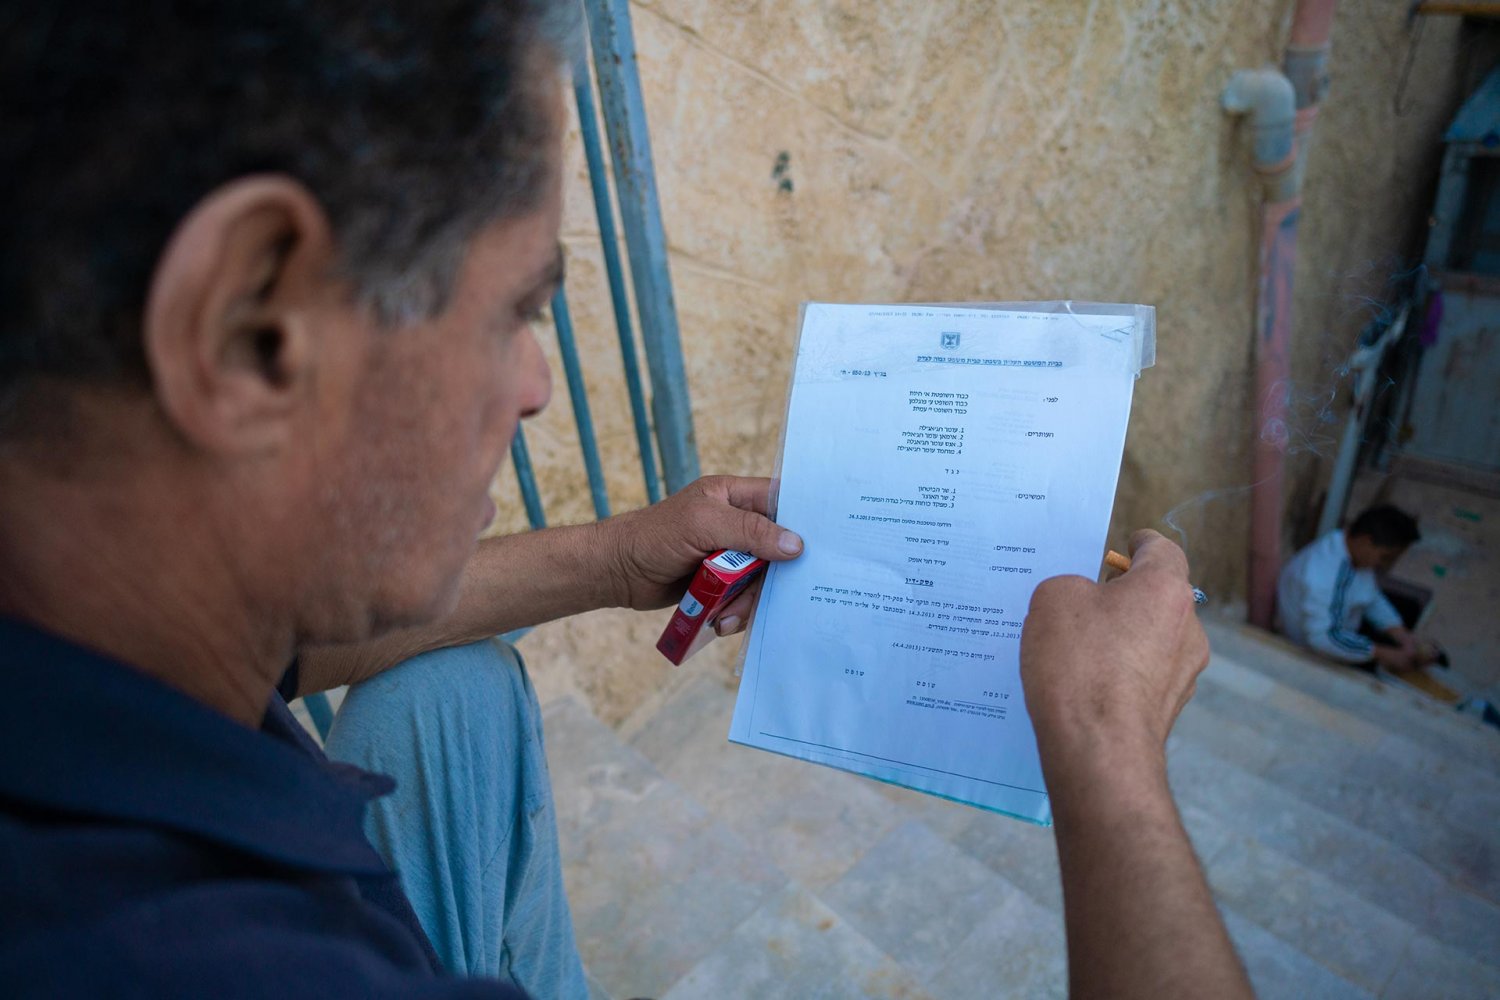 Omar Hajajla holds a 2013 Israeli Supreme Court order promising a tunnel to replace the fence around his al-Walaja home.